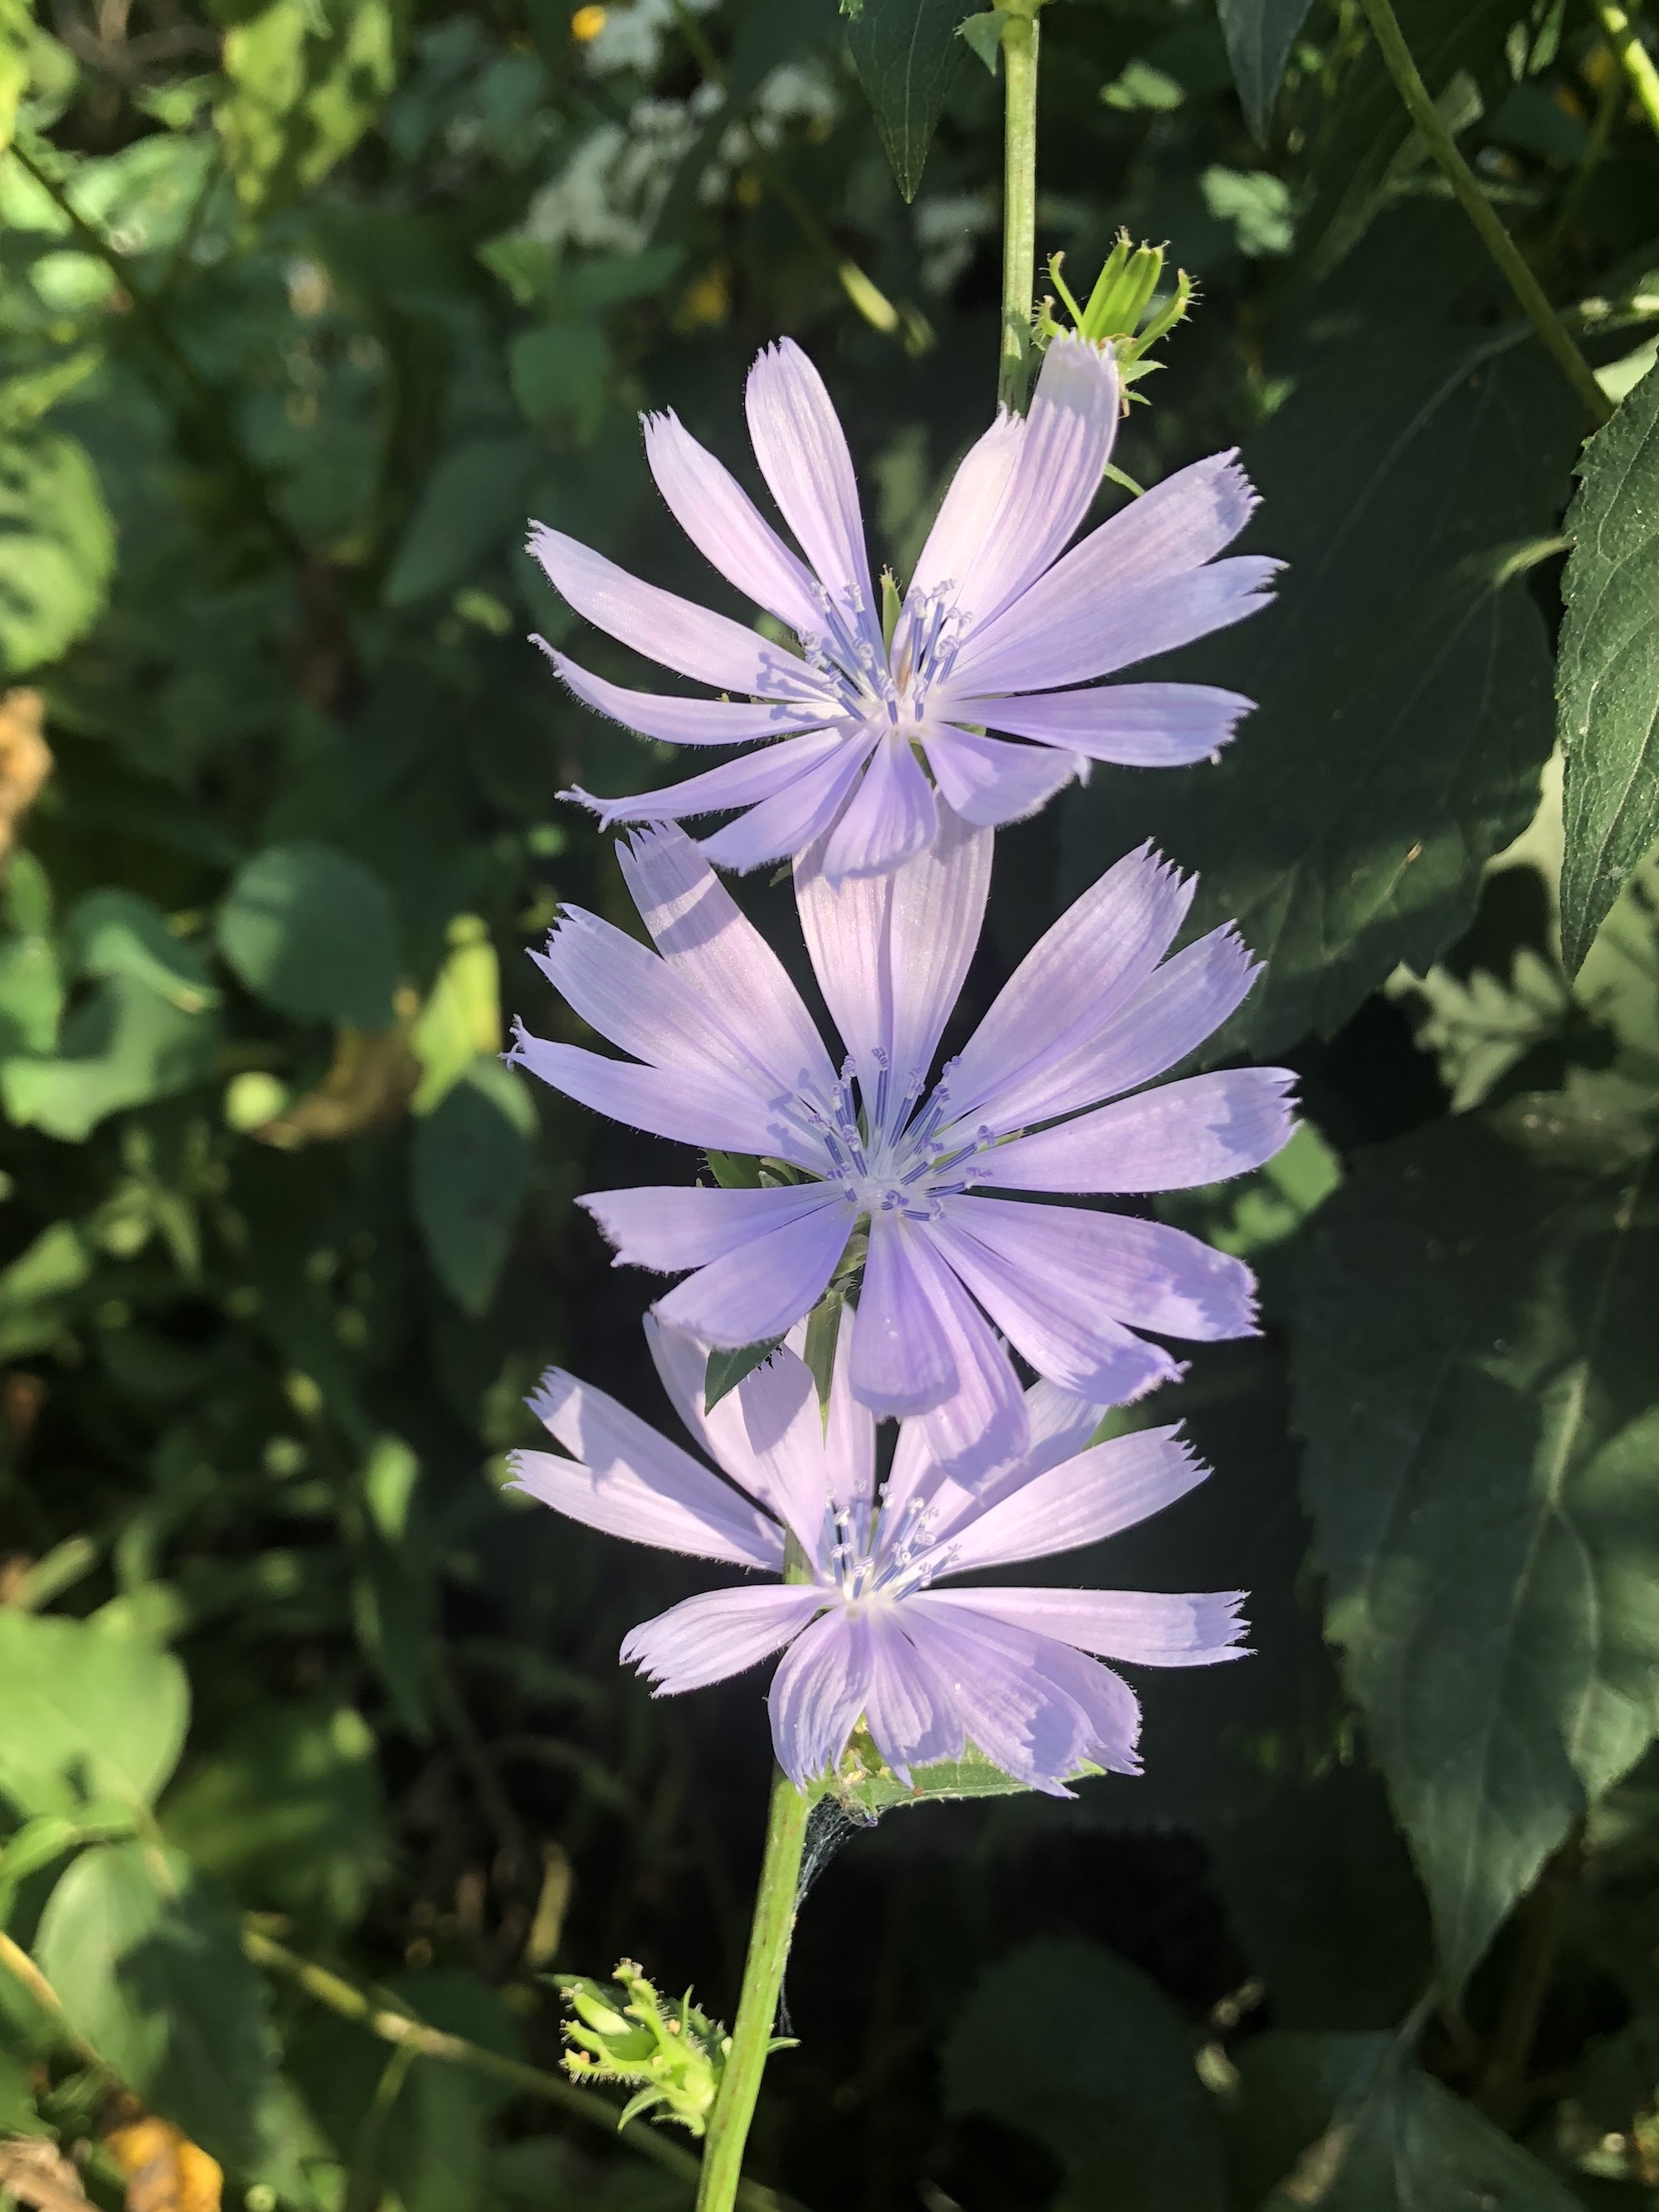 Chicory in Marion Dunn Prairie in Madison, Wisconsin on September 16, 2018.